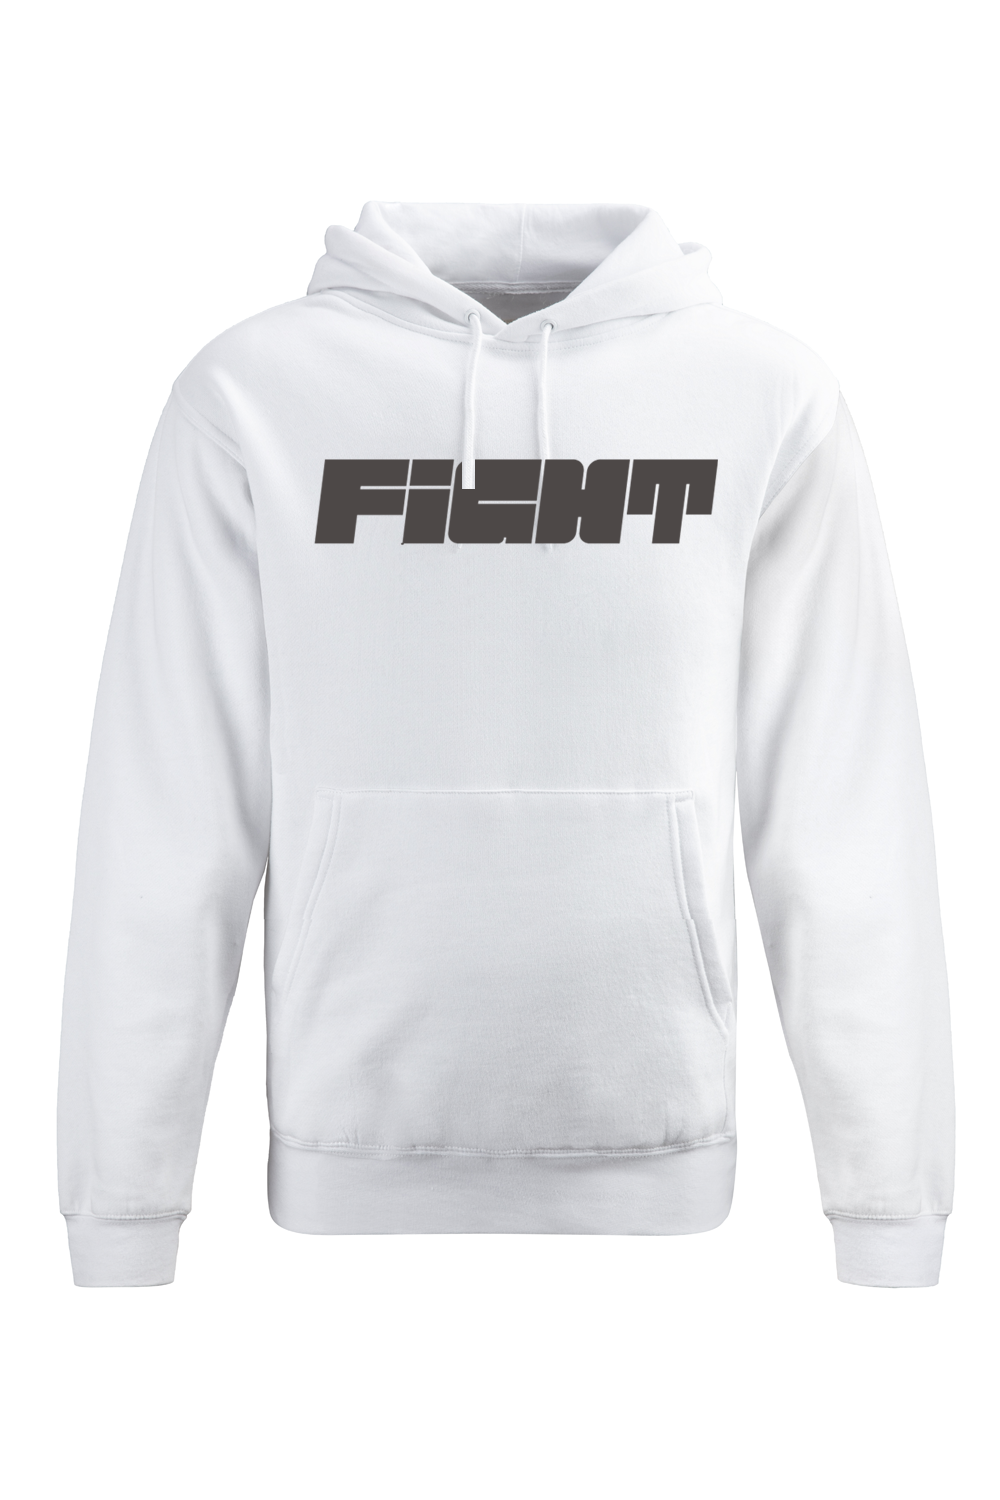 Fight Reflective Printed White Hoodie